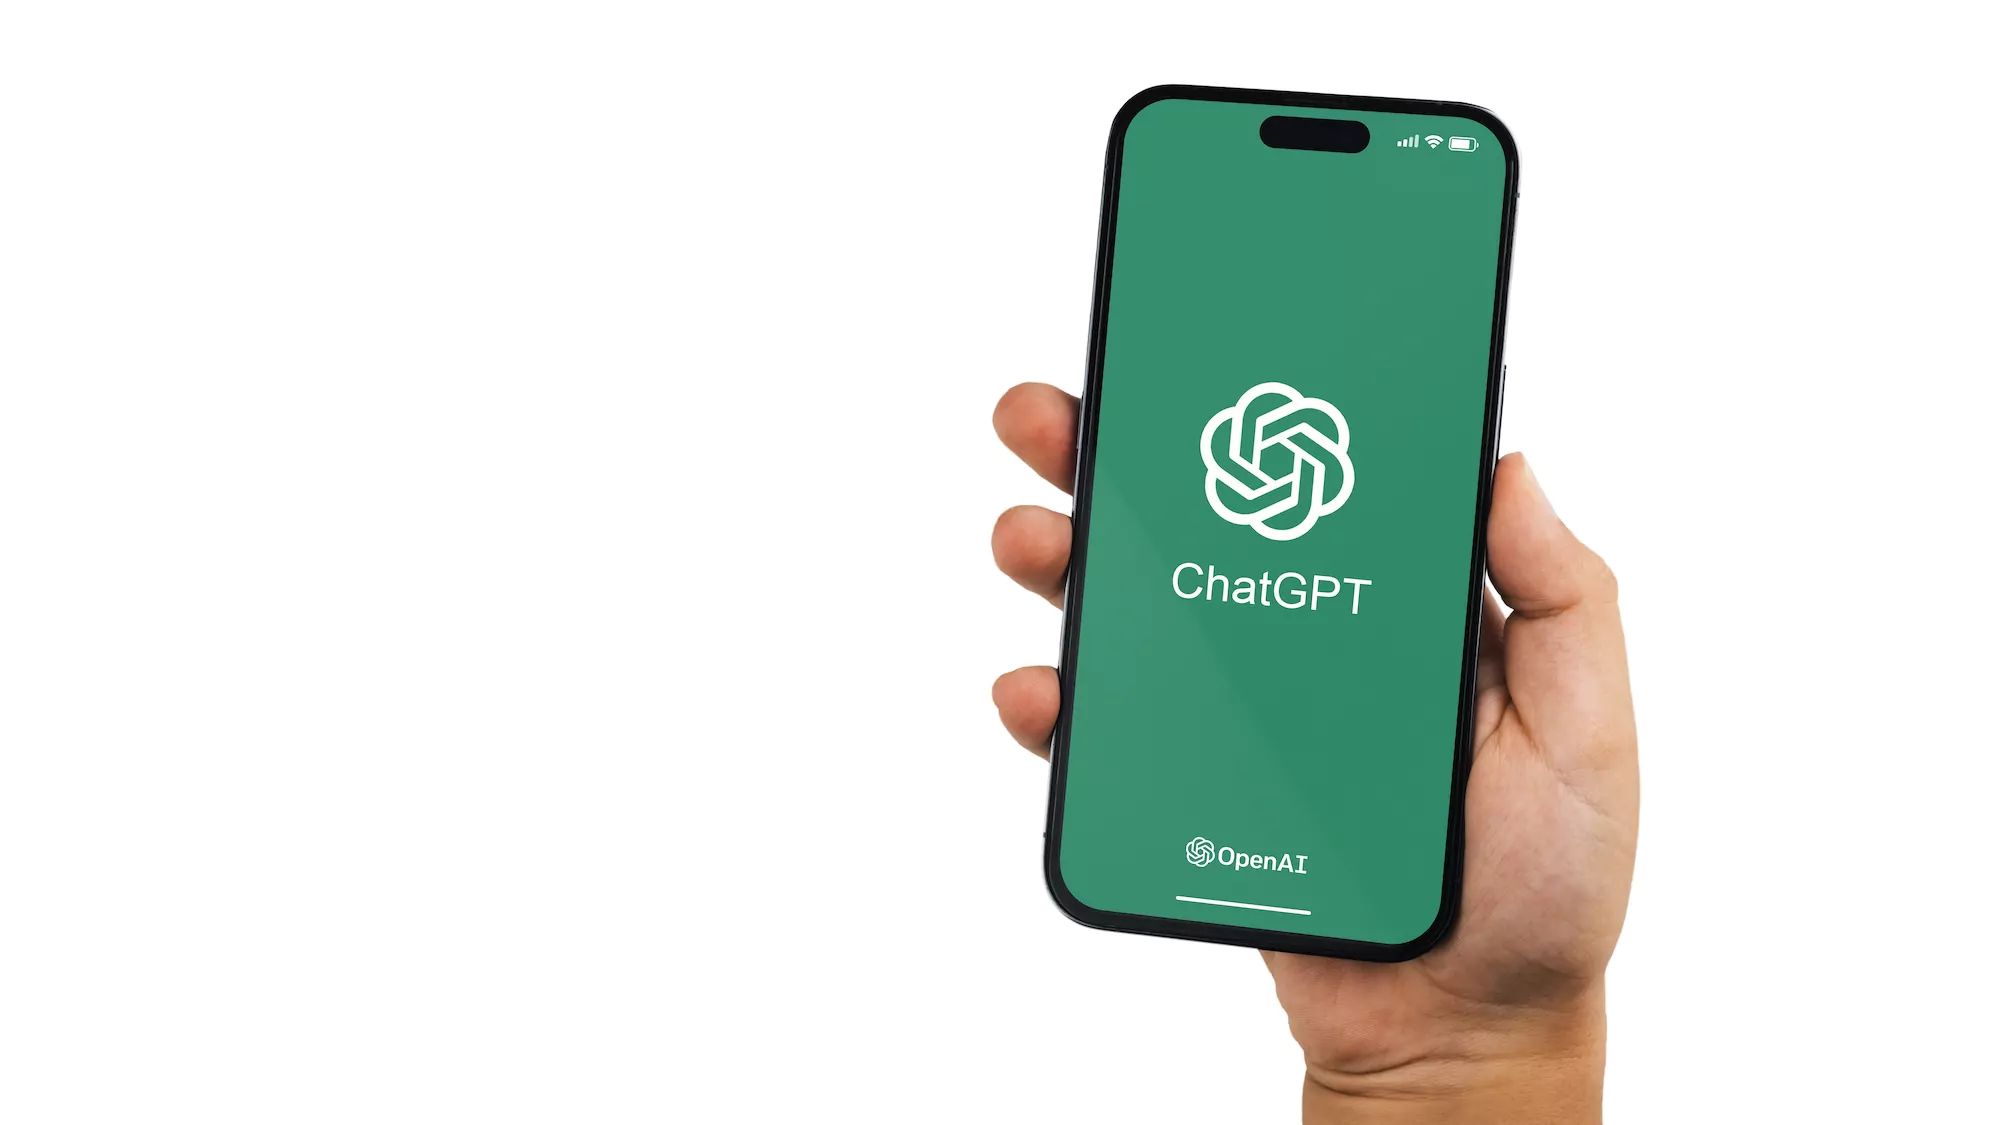 How to Use ChatGPT on iPhone